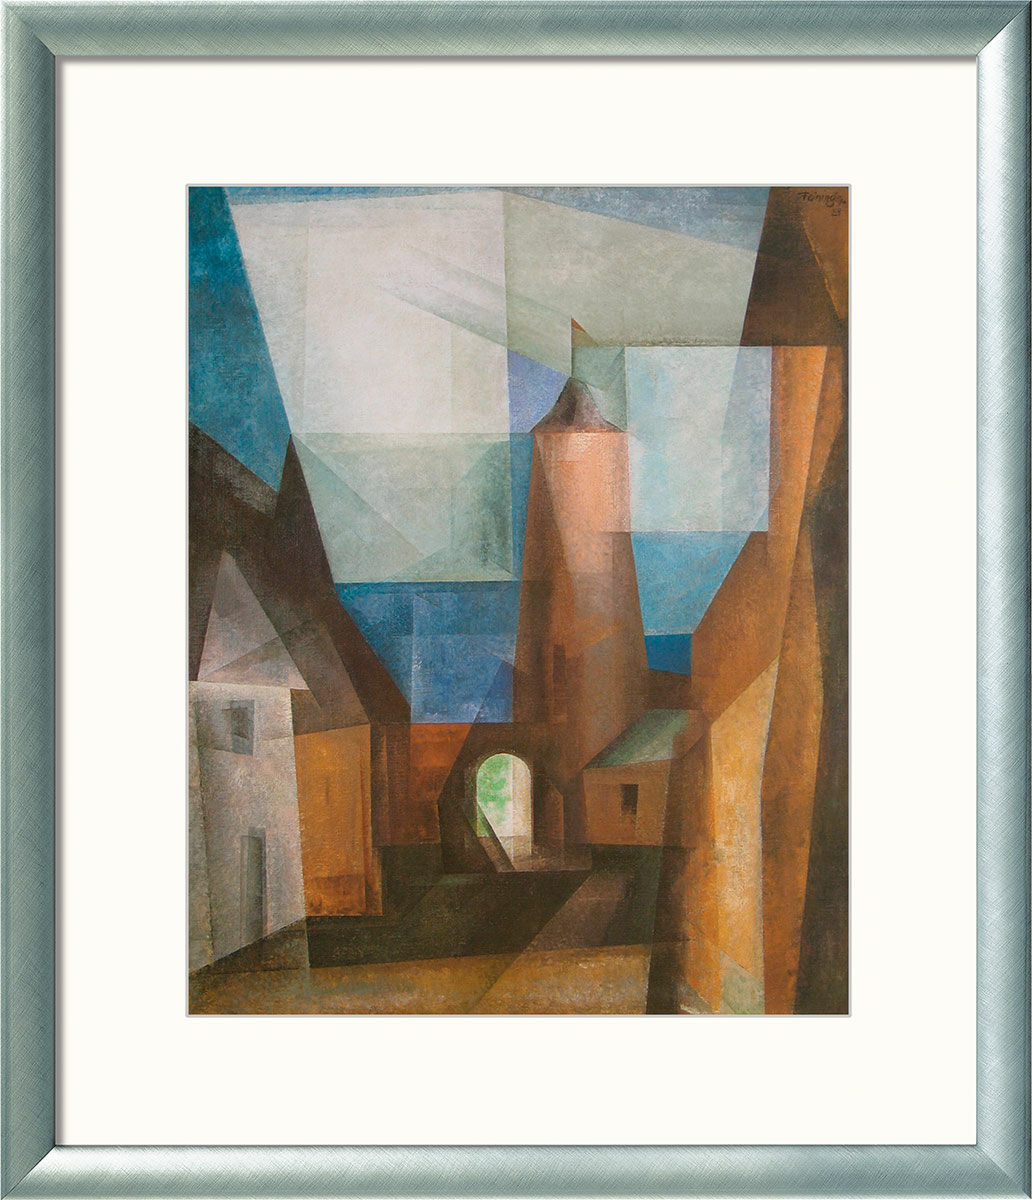 Picture "The Towert Grützturm in Treptow by the River Rega" (1928), framed by Lyonel Feininger